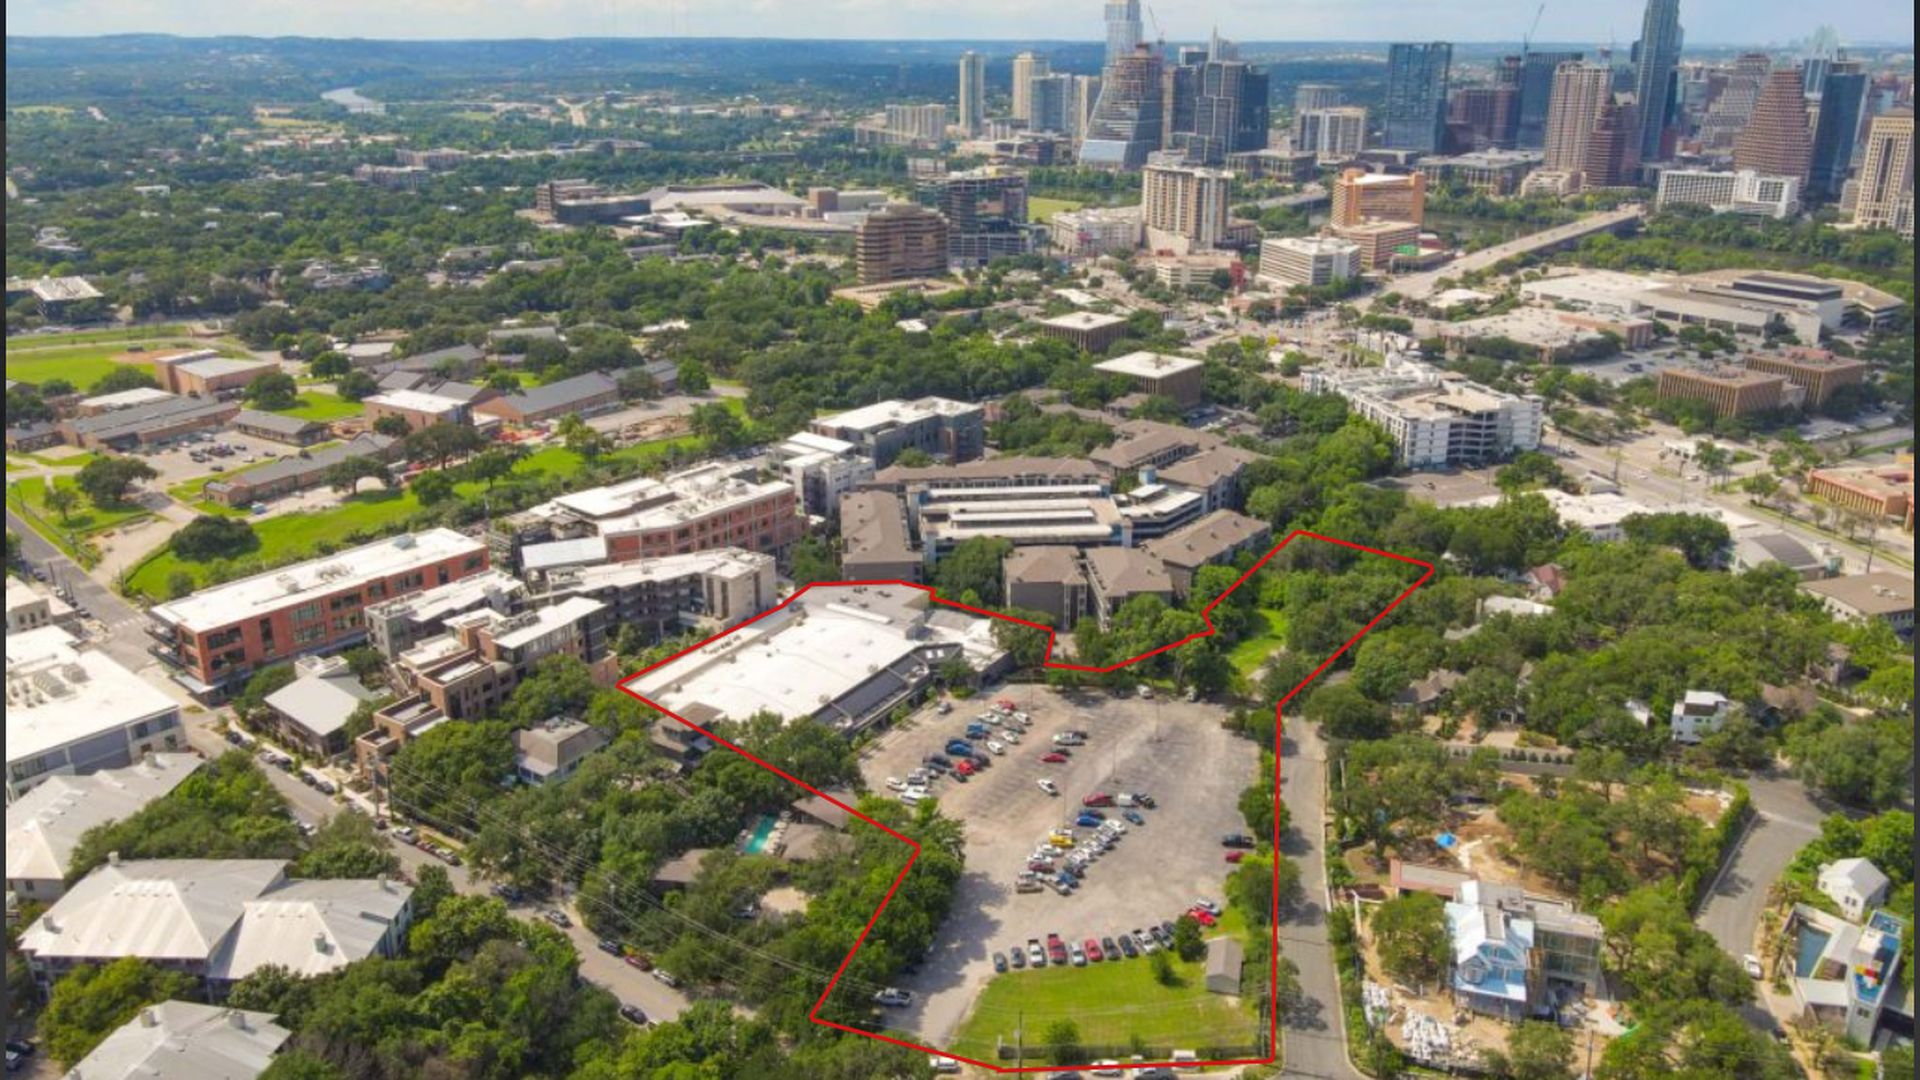 An overview of the property at 200 Academy Drive in Austin